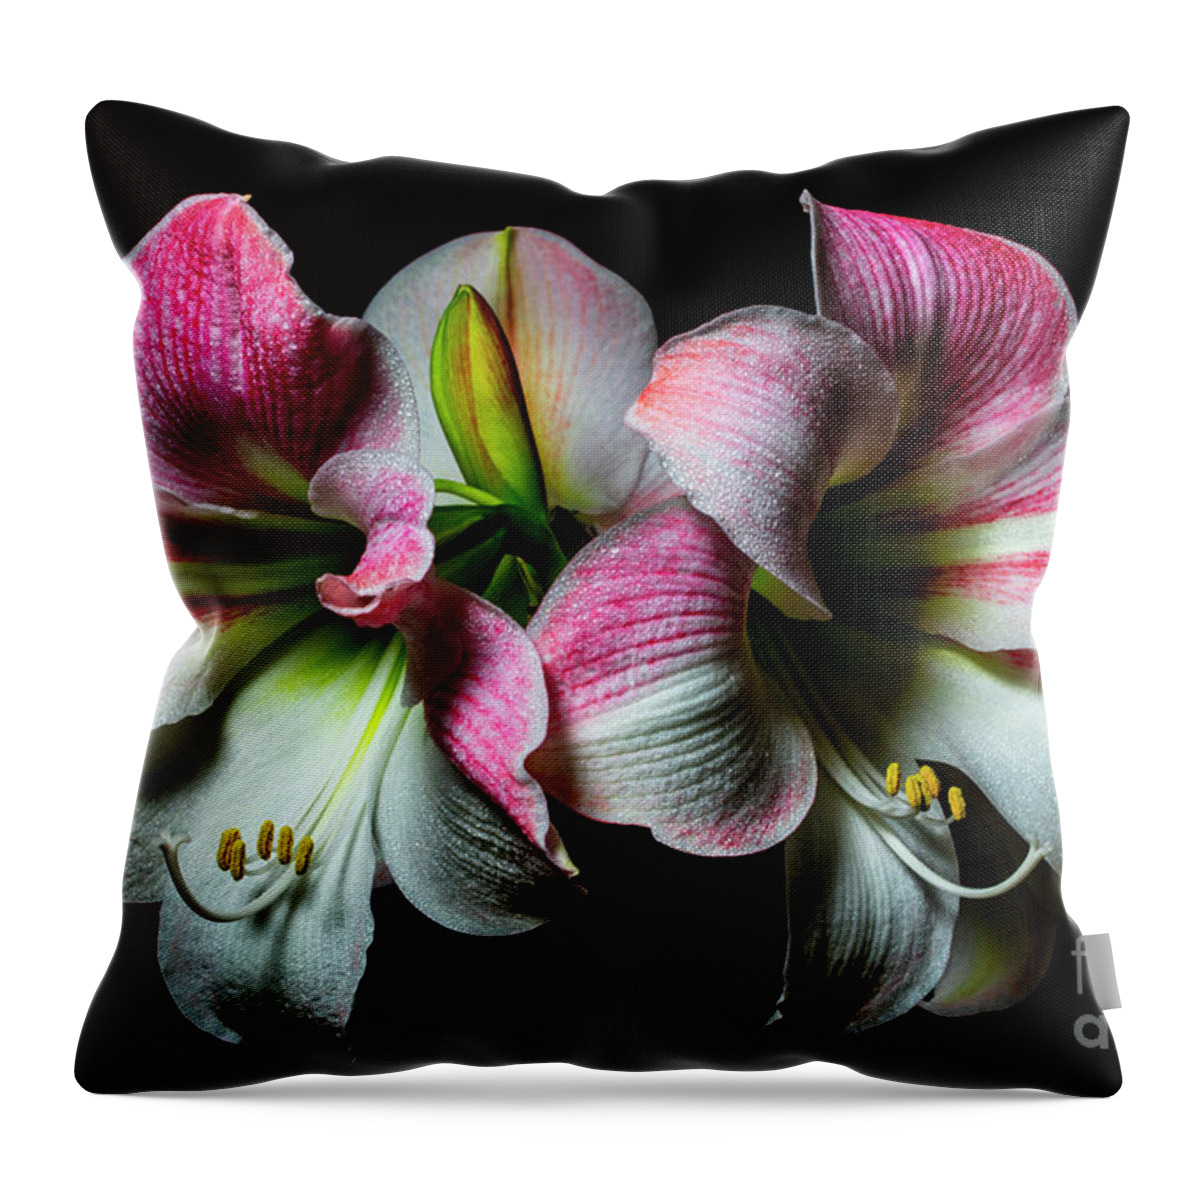 Royal Dutch Amaryllis Throw Pillow featuring the photograph Radiantly by Doug Norkum